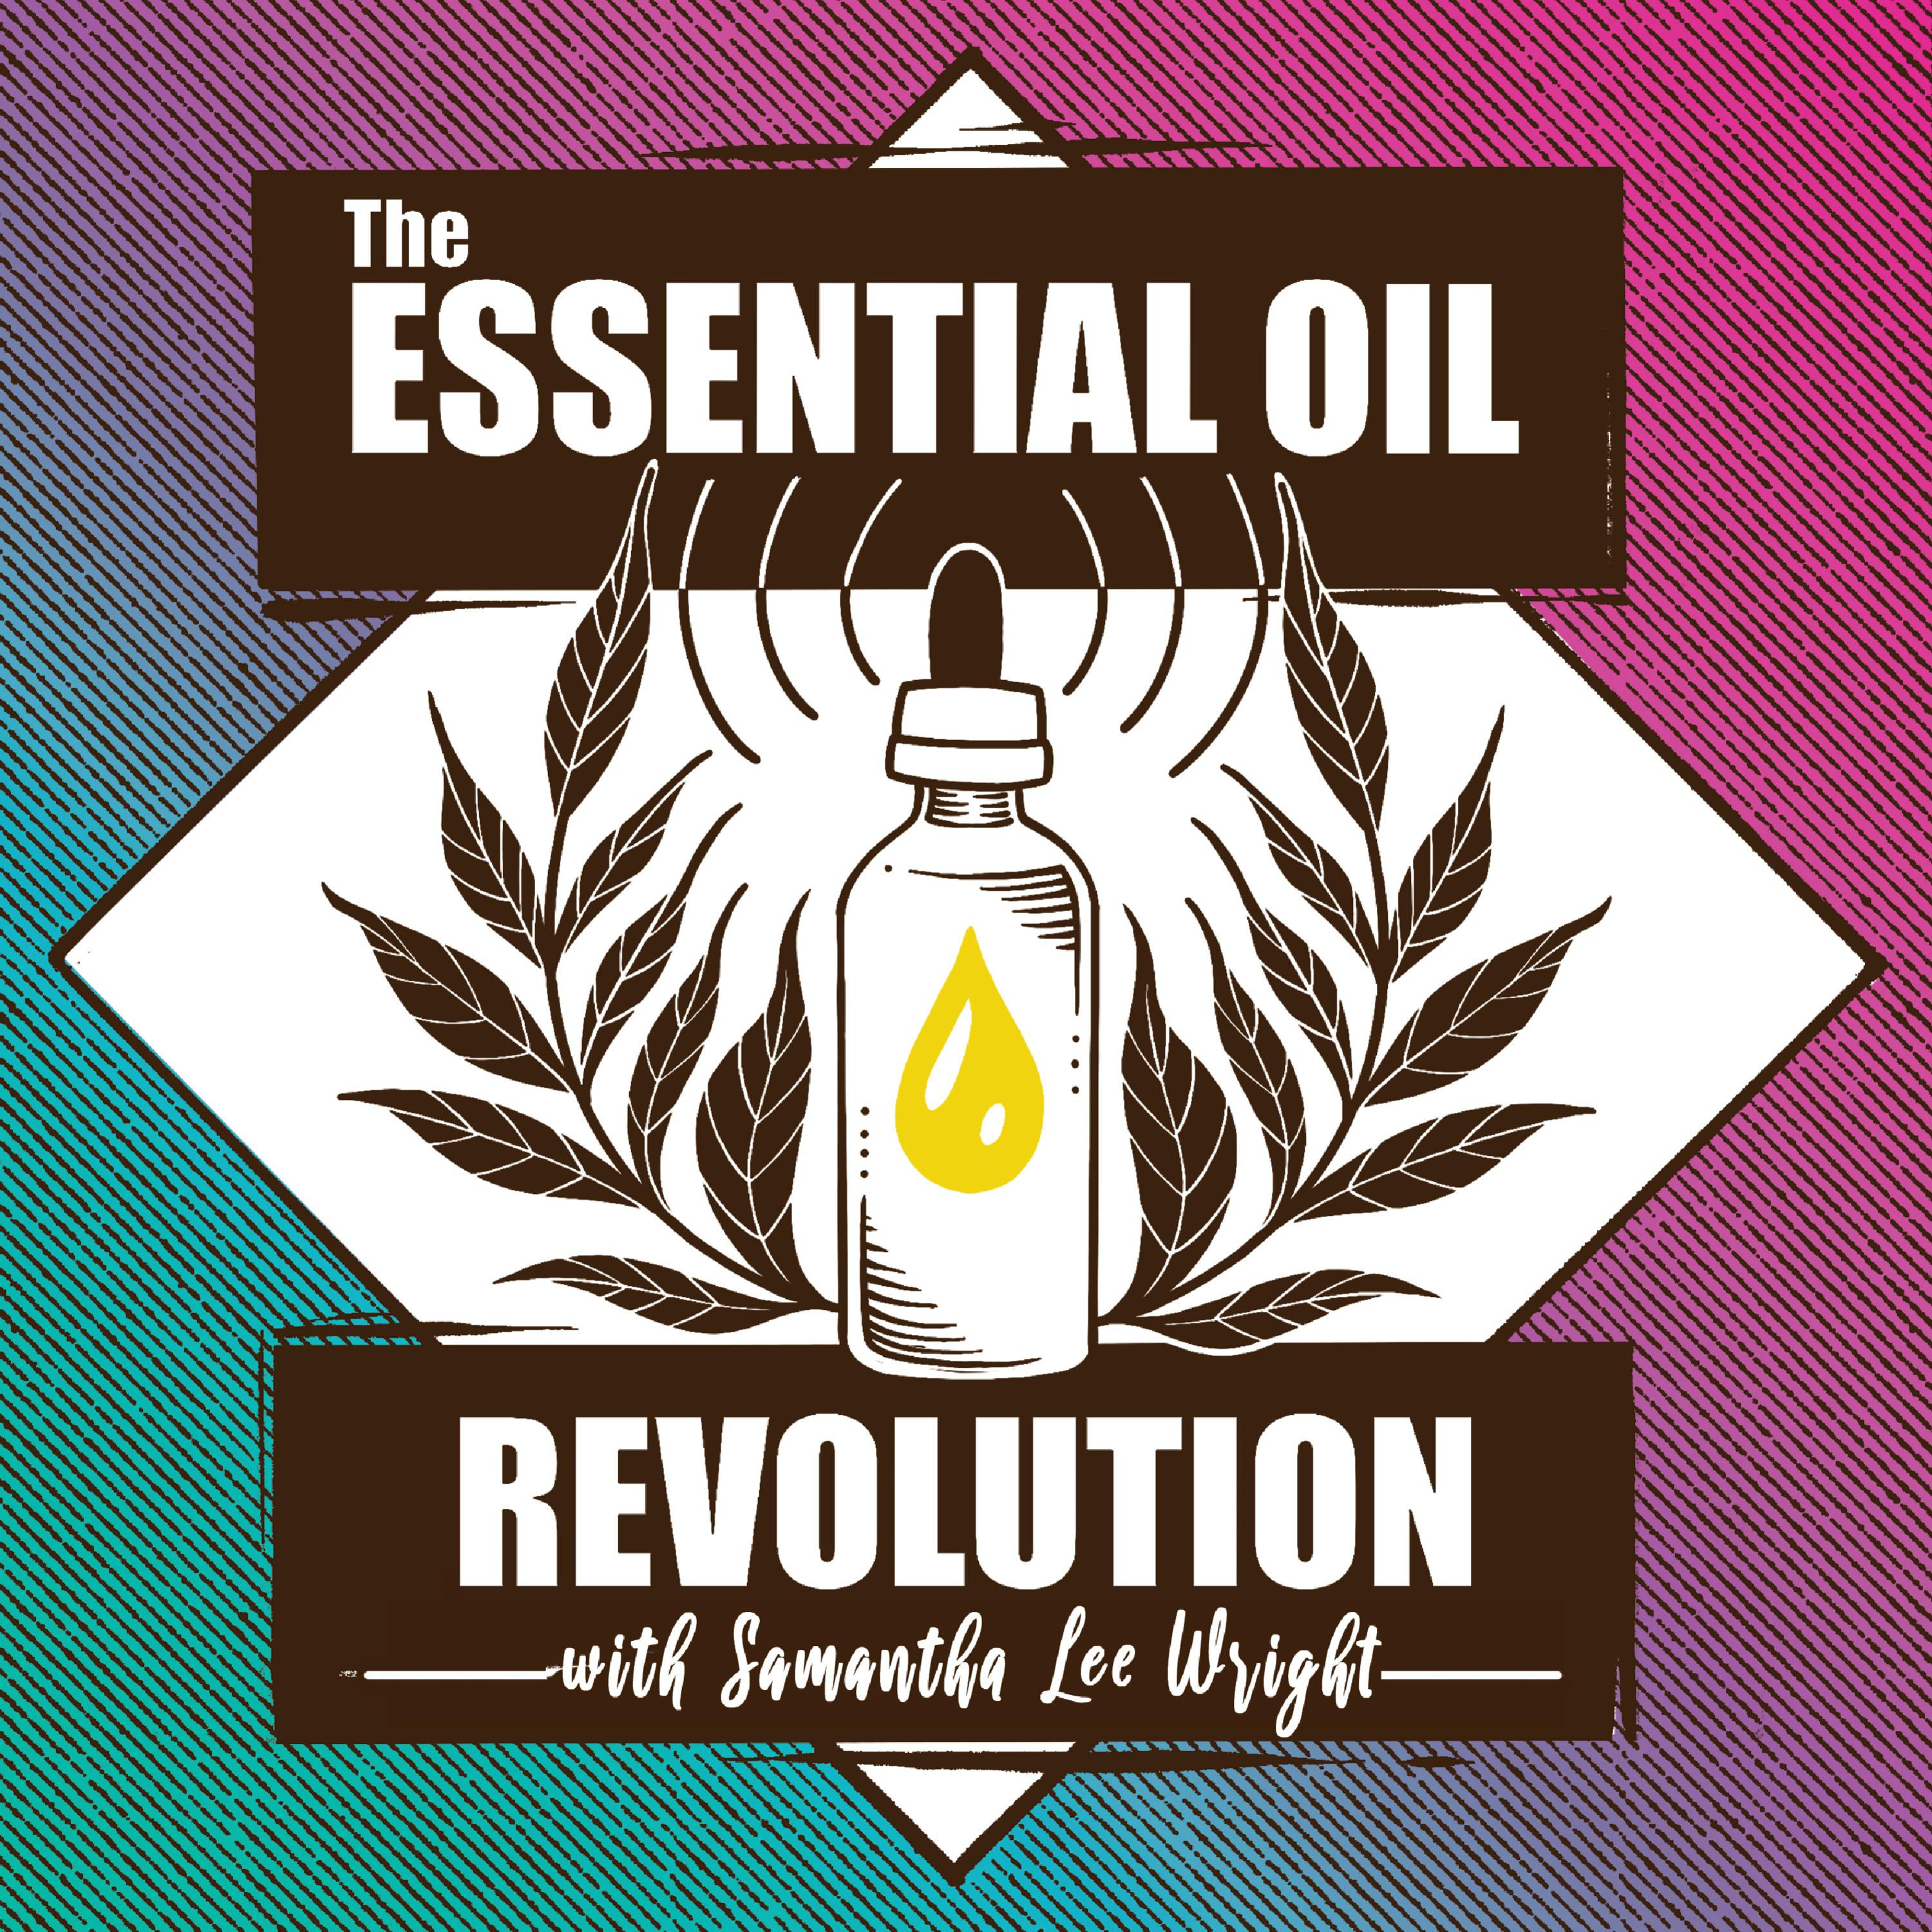 377:  Clinical Perspective on Essential Oils w/ Dr. Sarah LoBisco